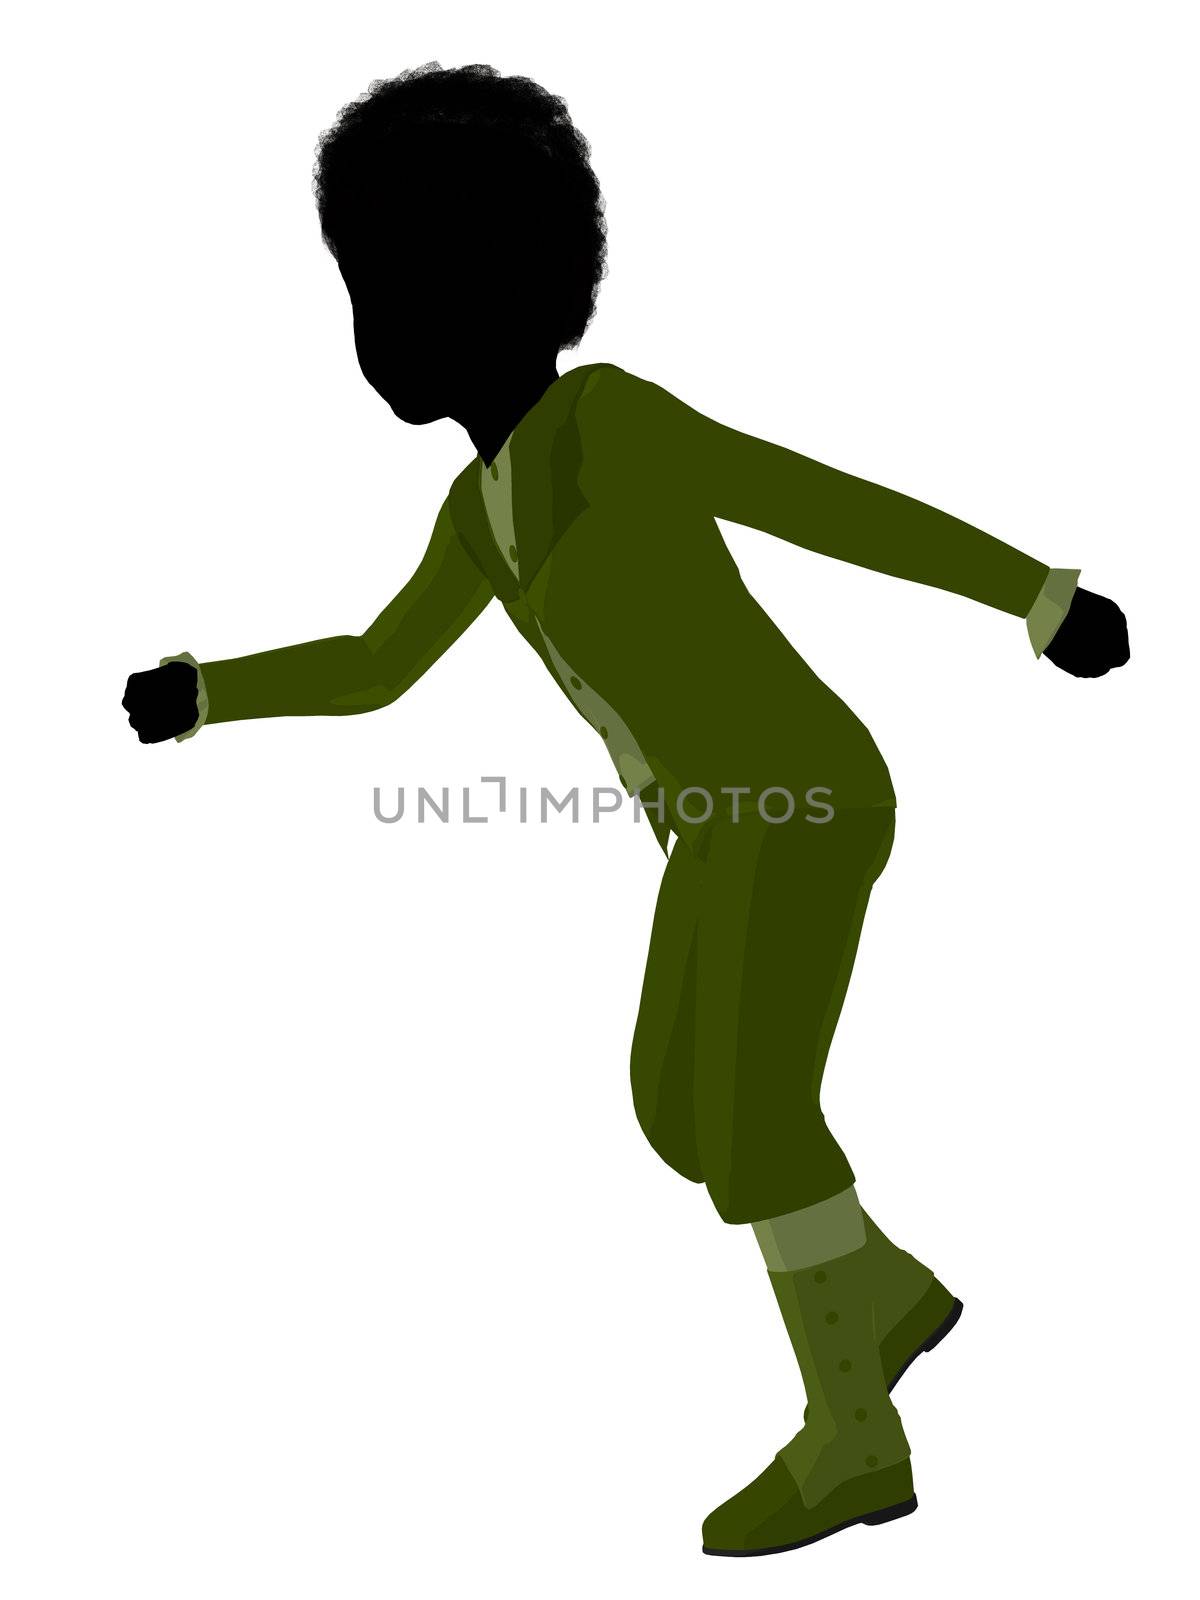 African American Victorian Boy Illustration Silhouette by kathygold